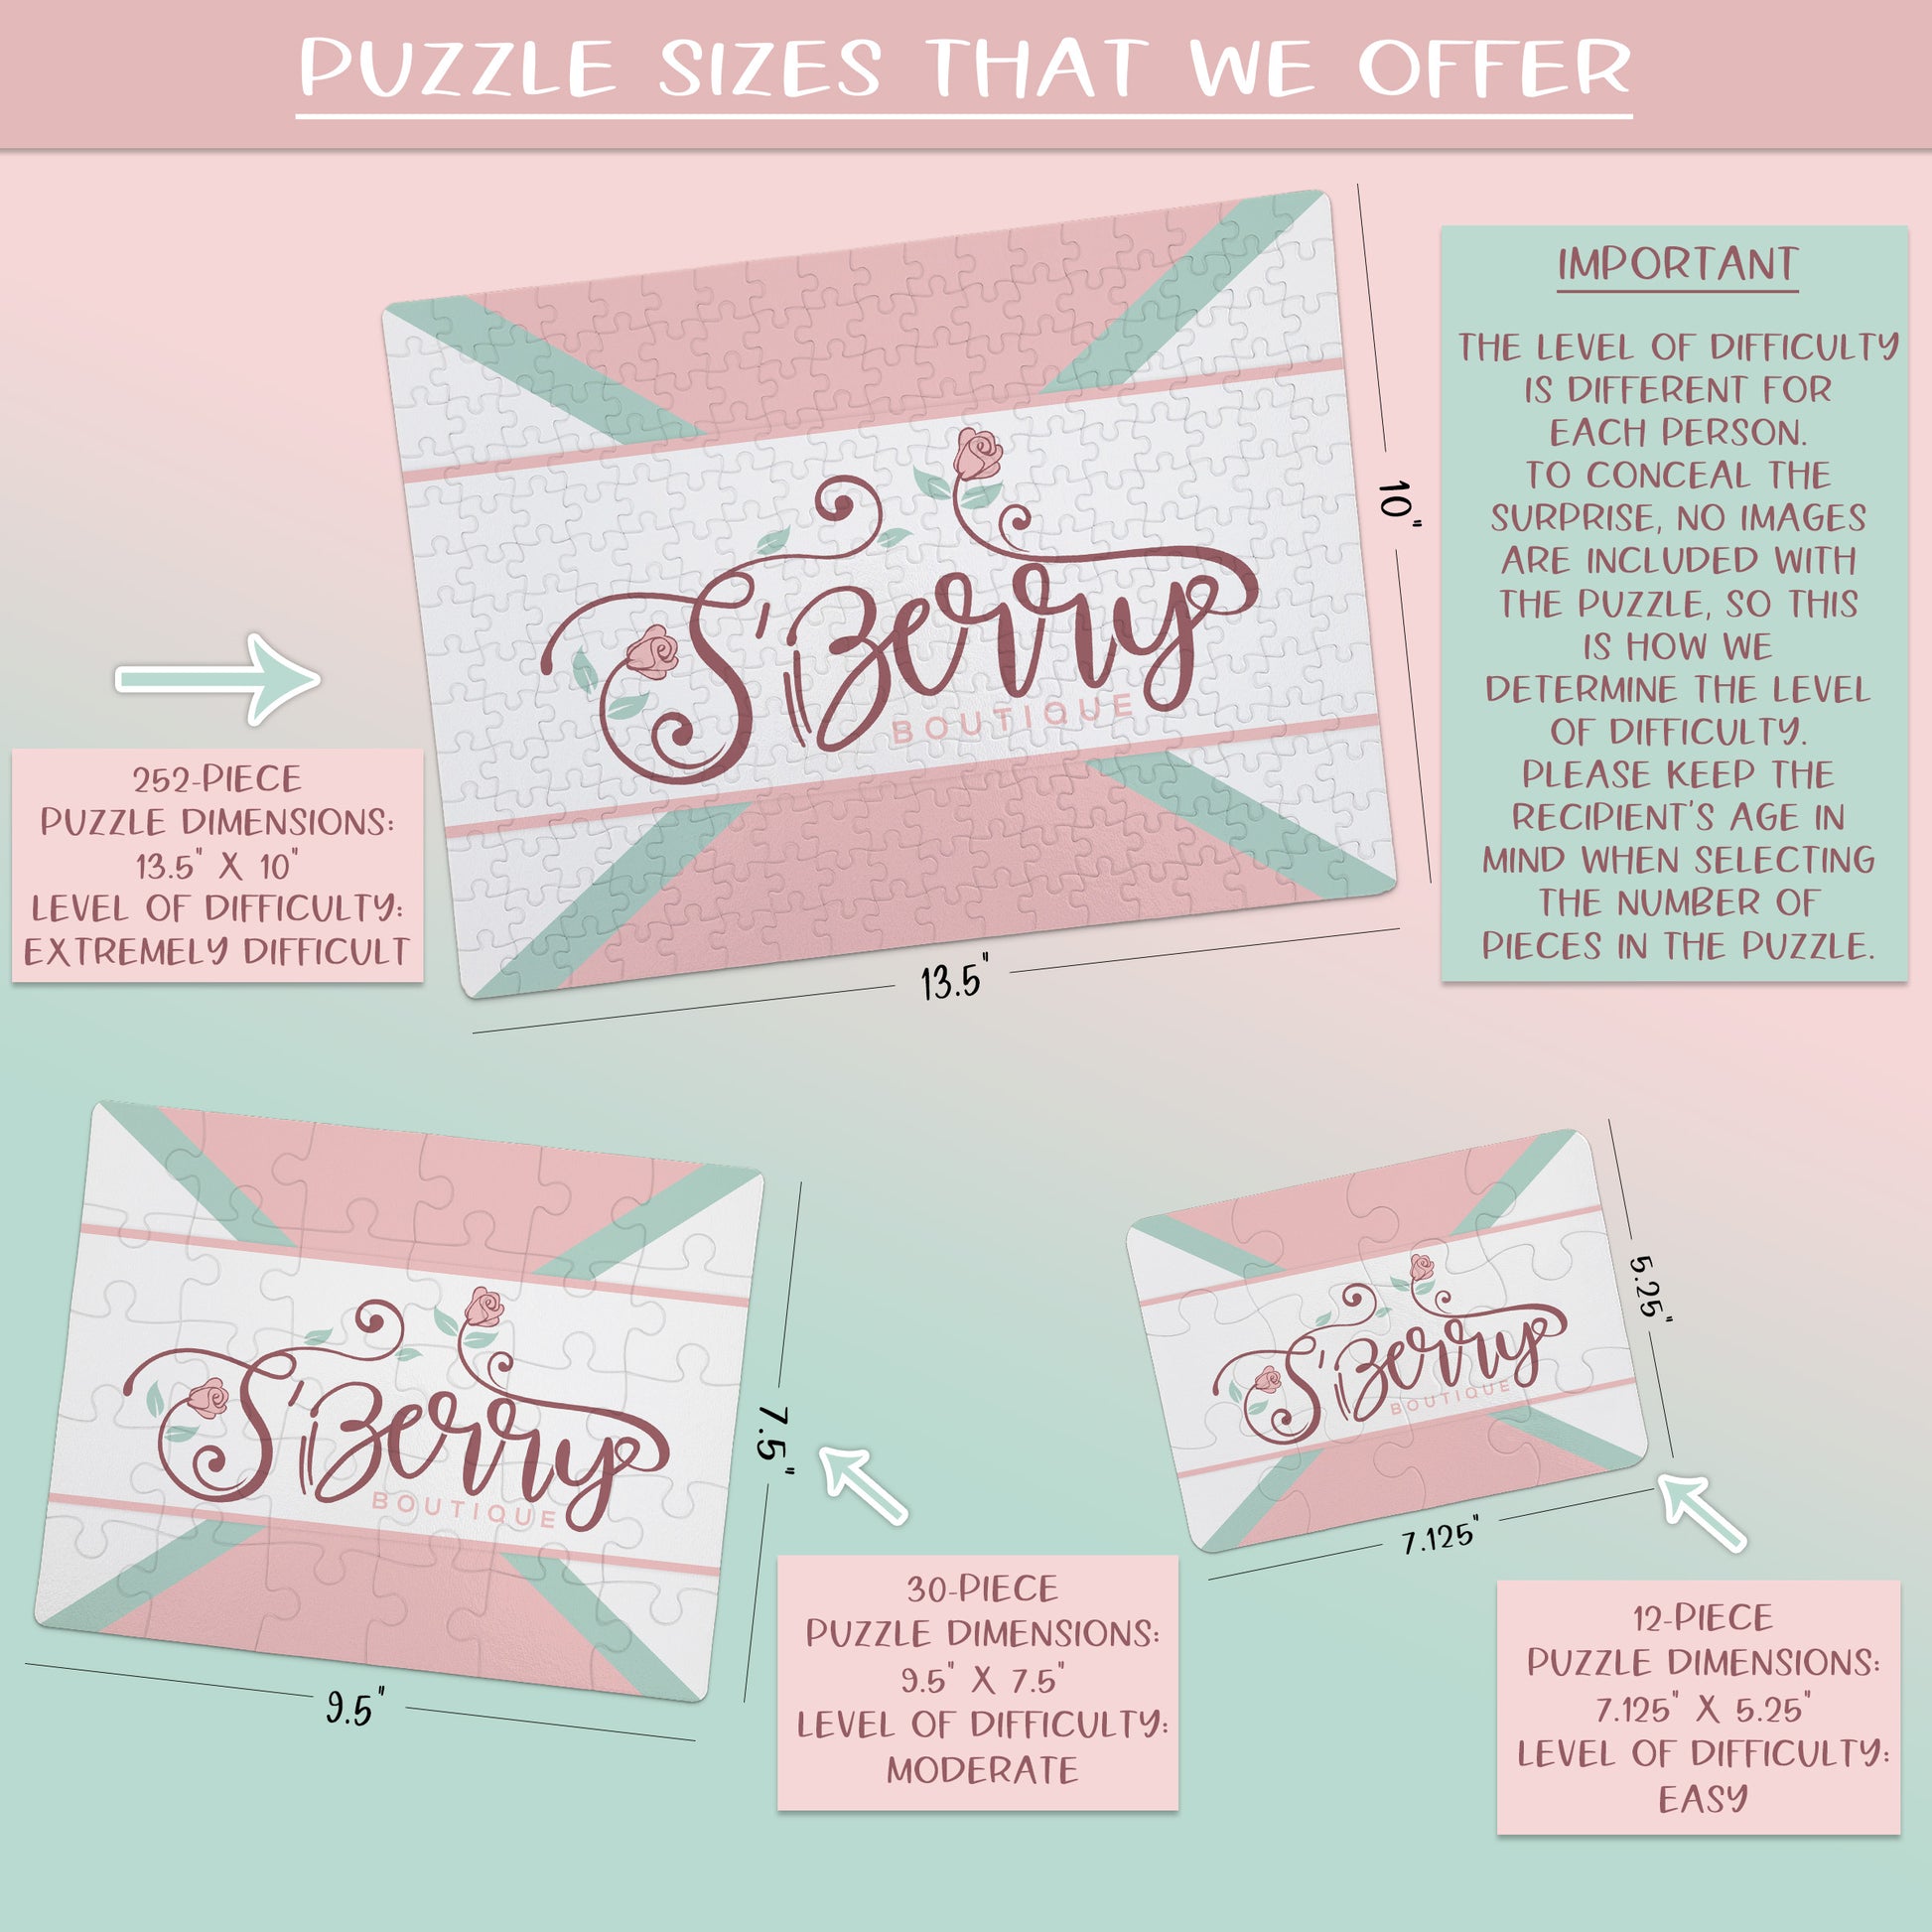 Create Your Own Puzzle - Floral Design - CYOP0017 | S'Berry Boutique